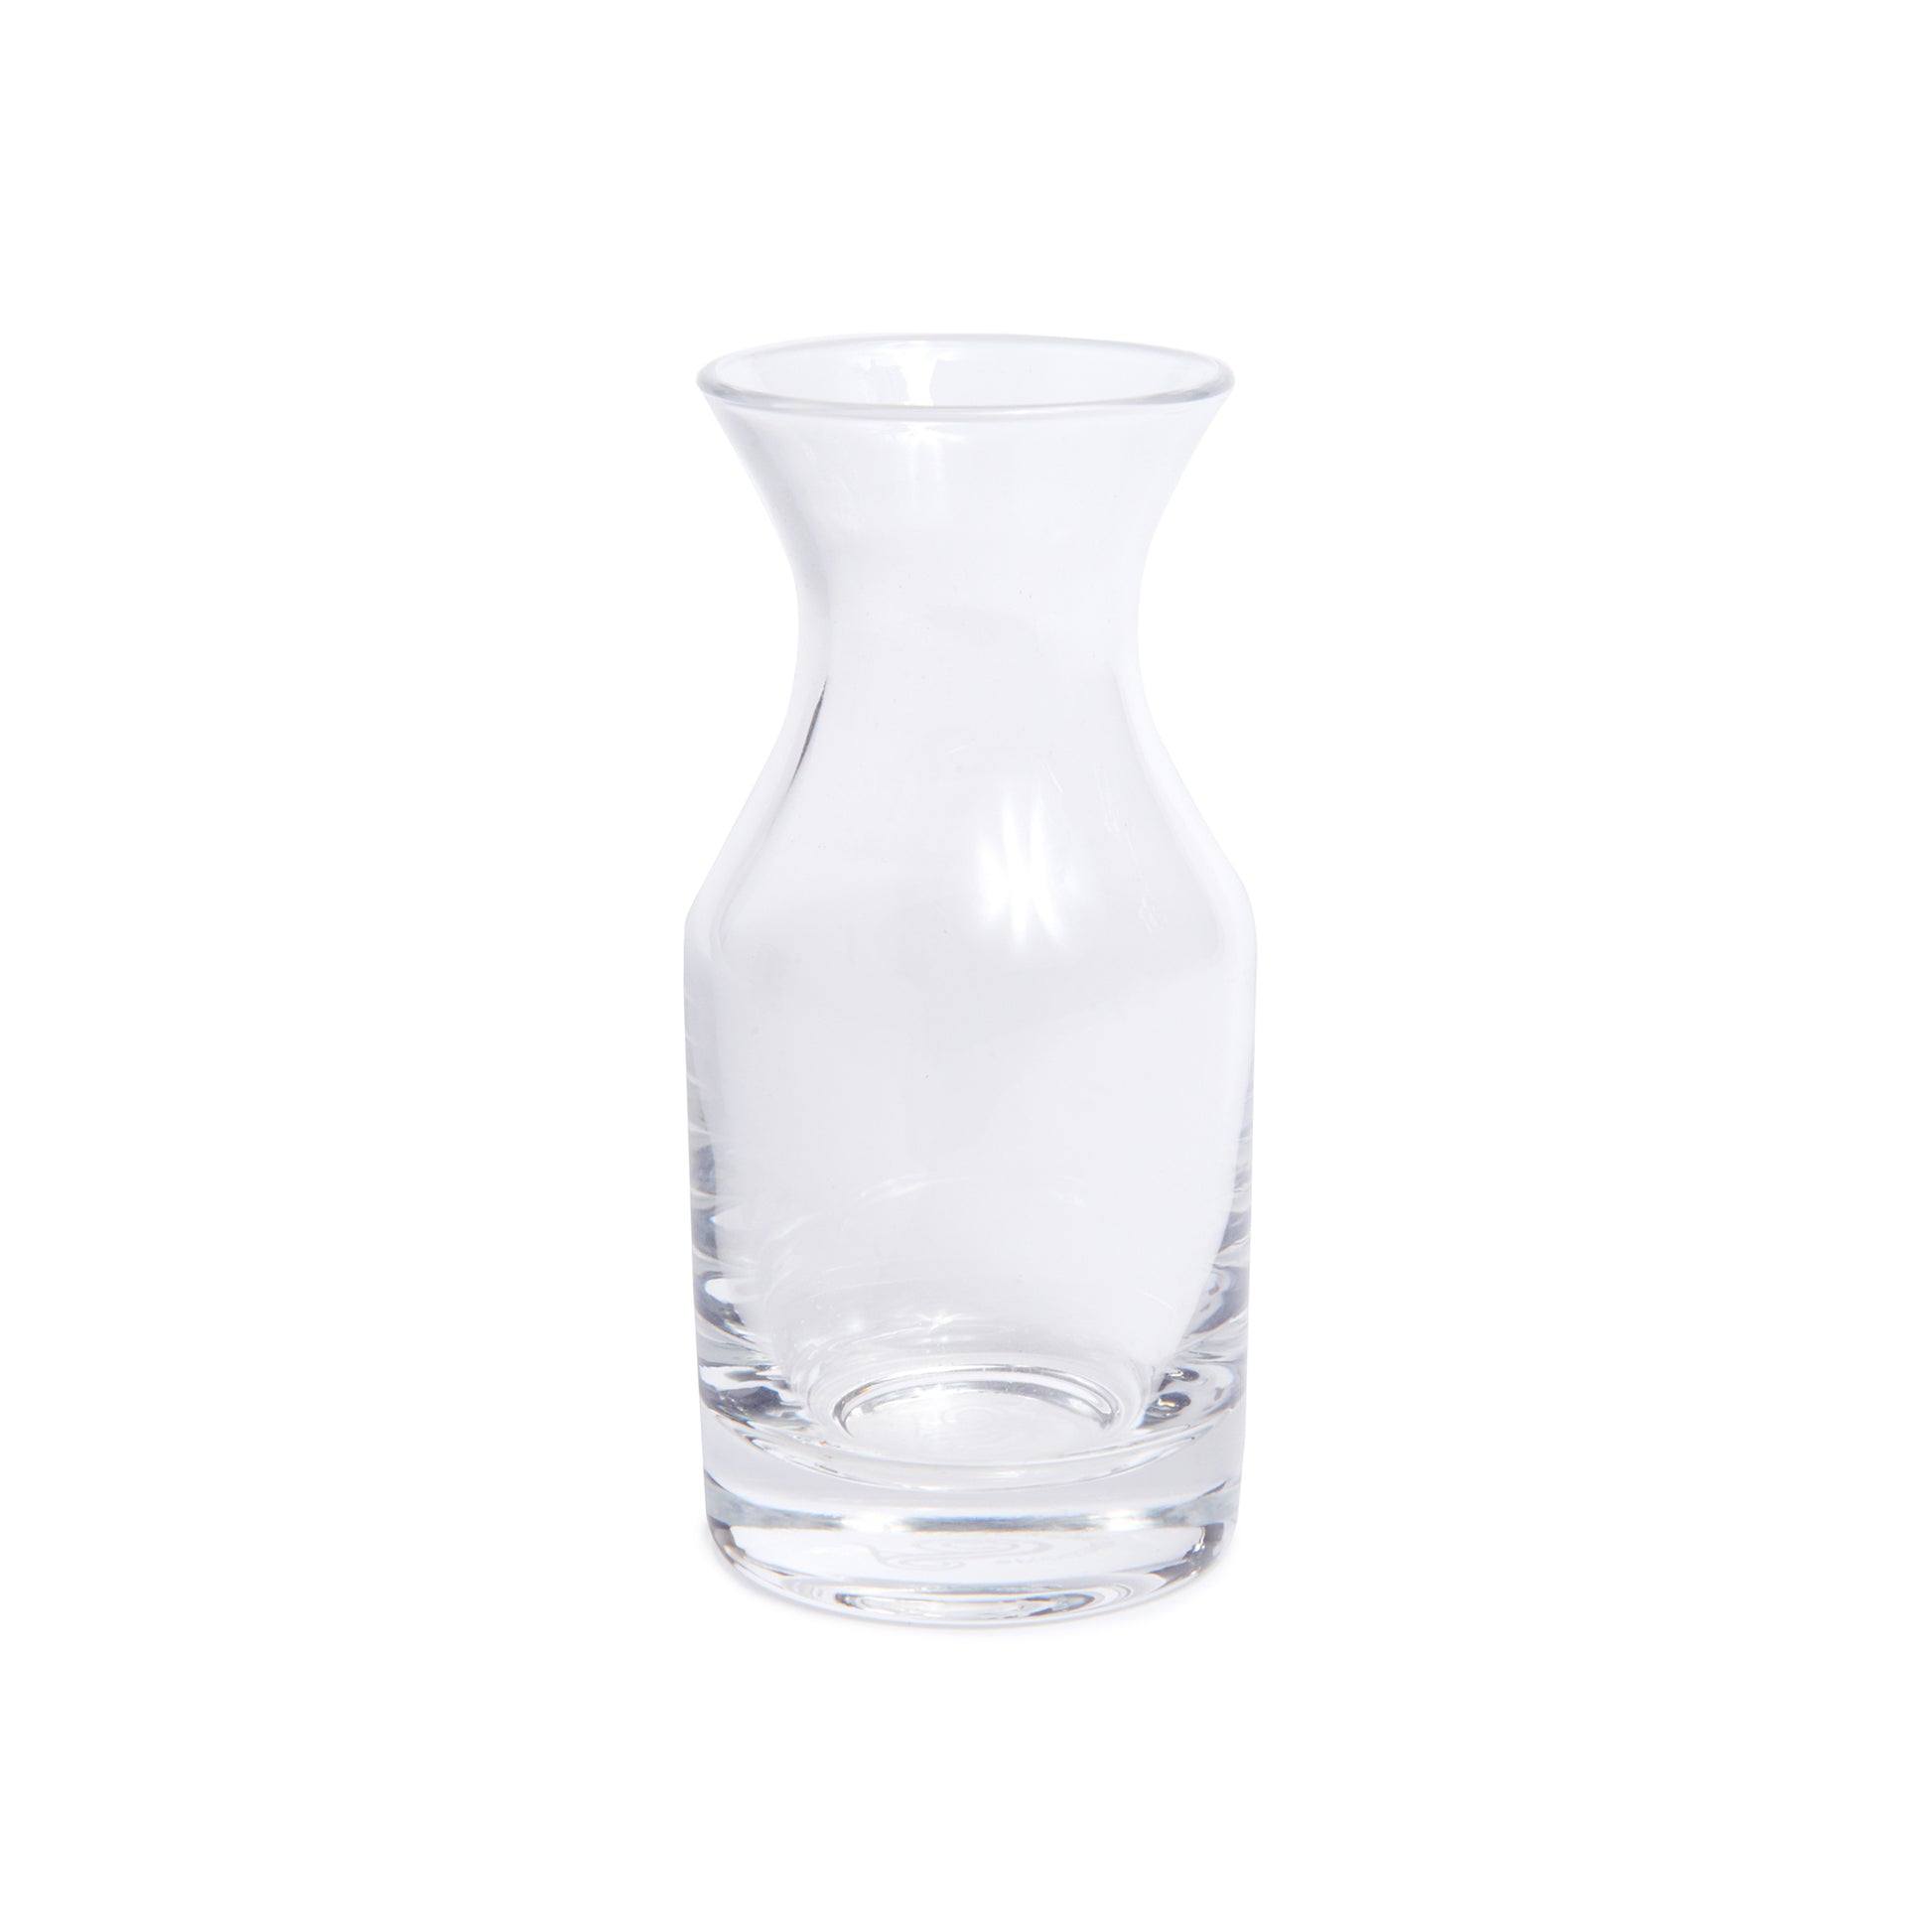 38 oz Plastic Carafe - HPG - Promotional Products Supplier